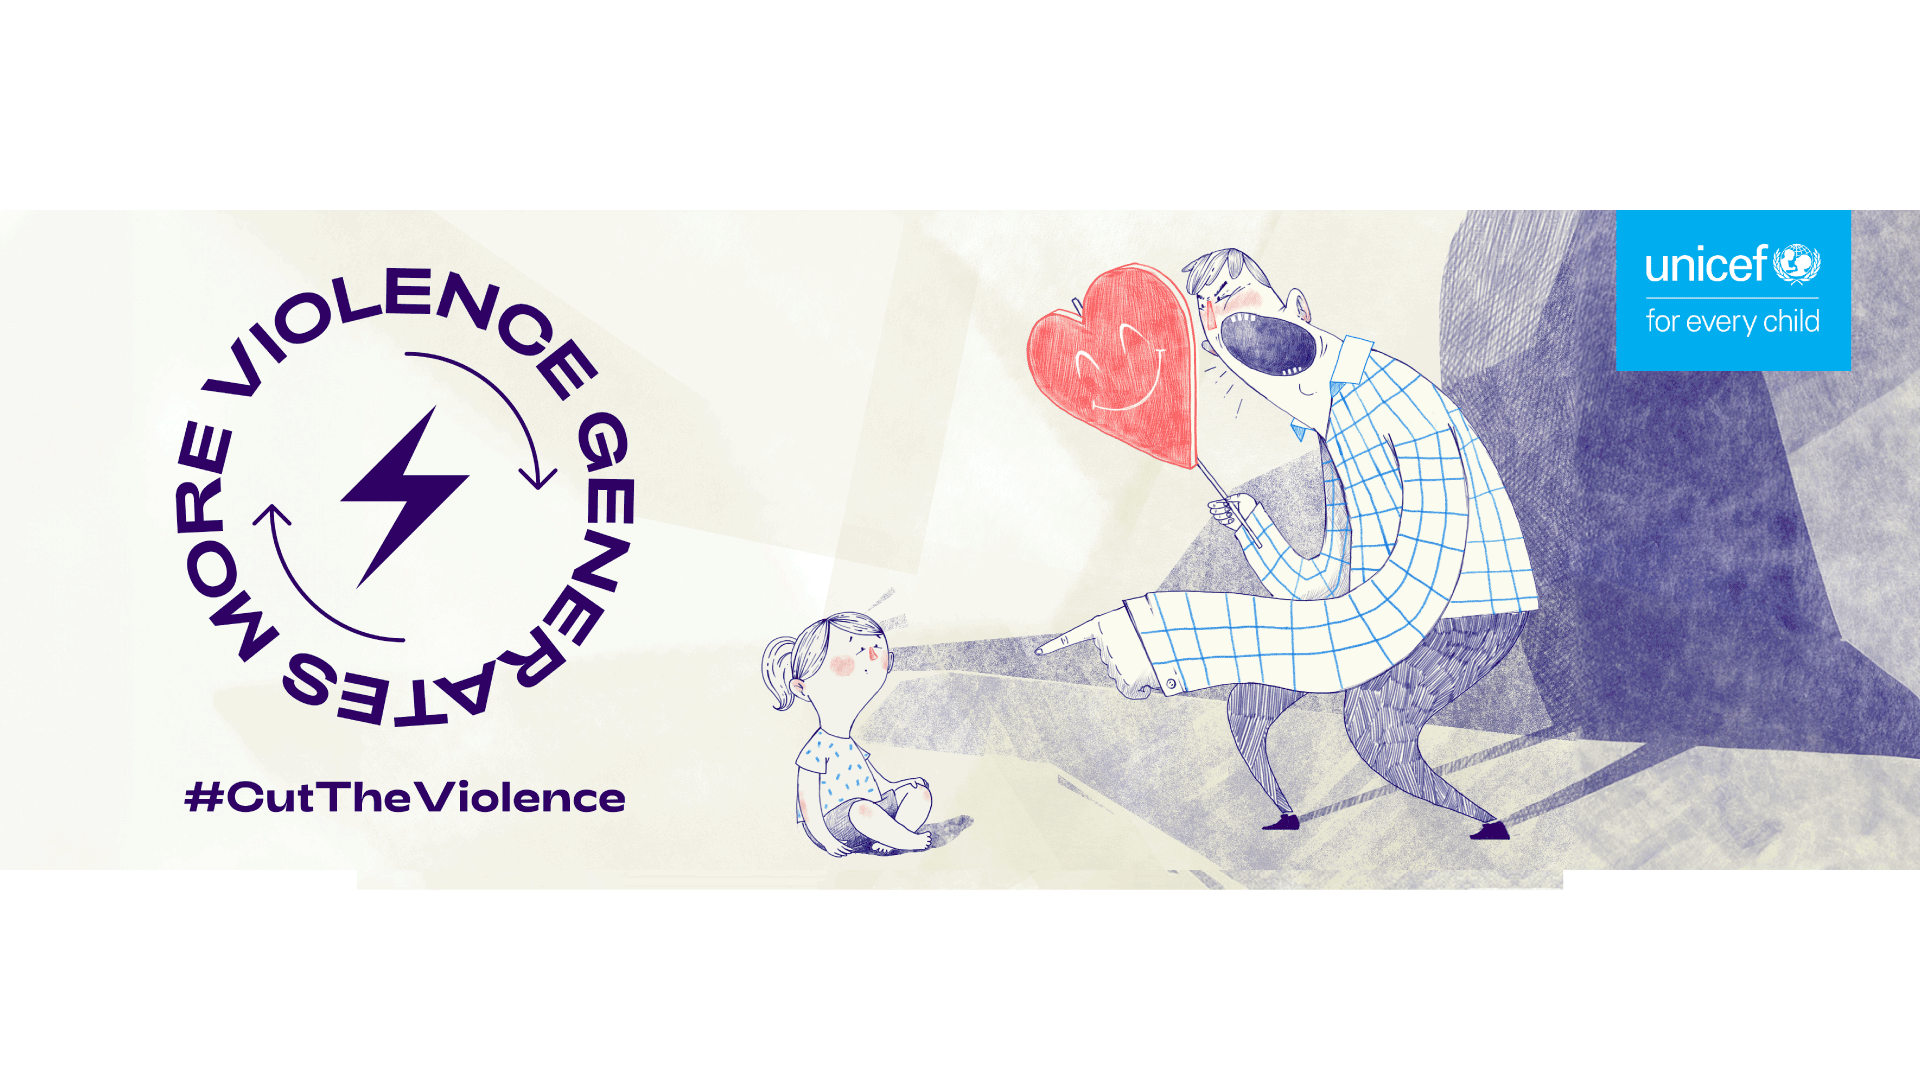 Image that shows an adult yelling to a child and reads 2 in 3 children and adolescents from Latin America and the Caribbean experience violence at home as a form of parenting.